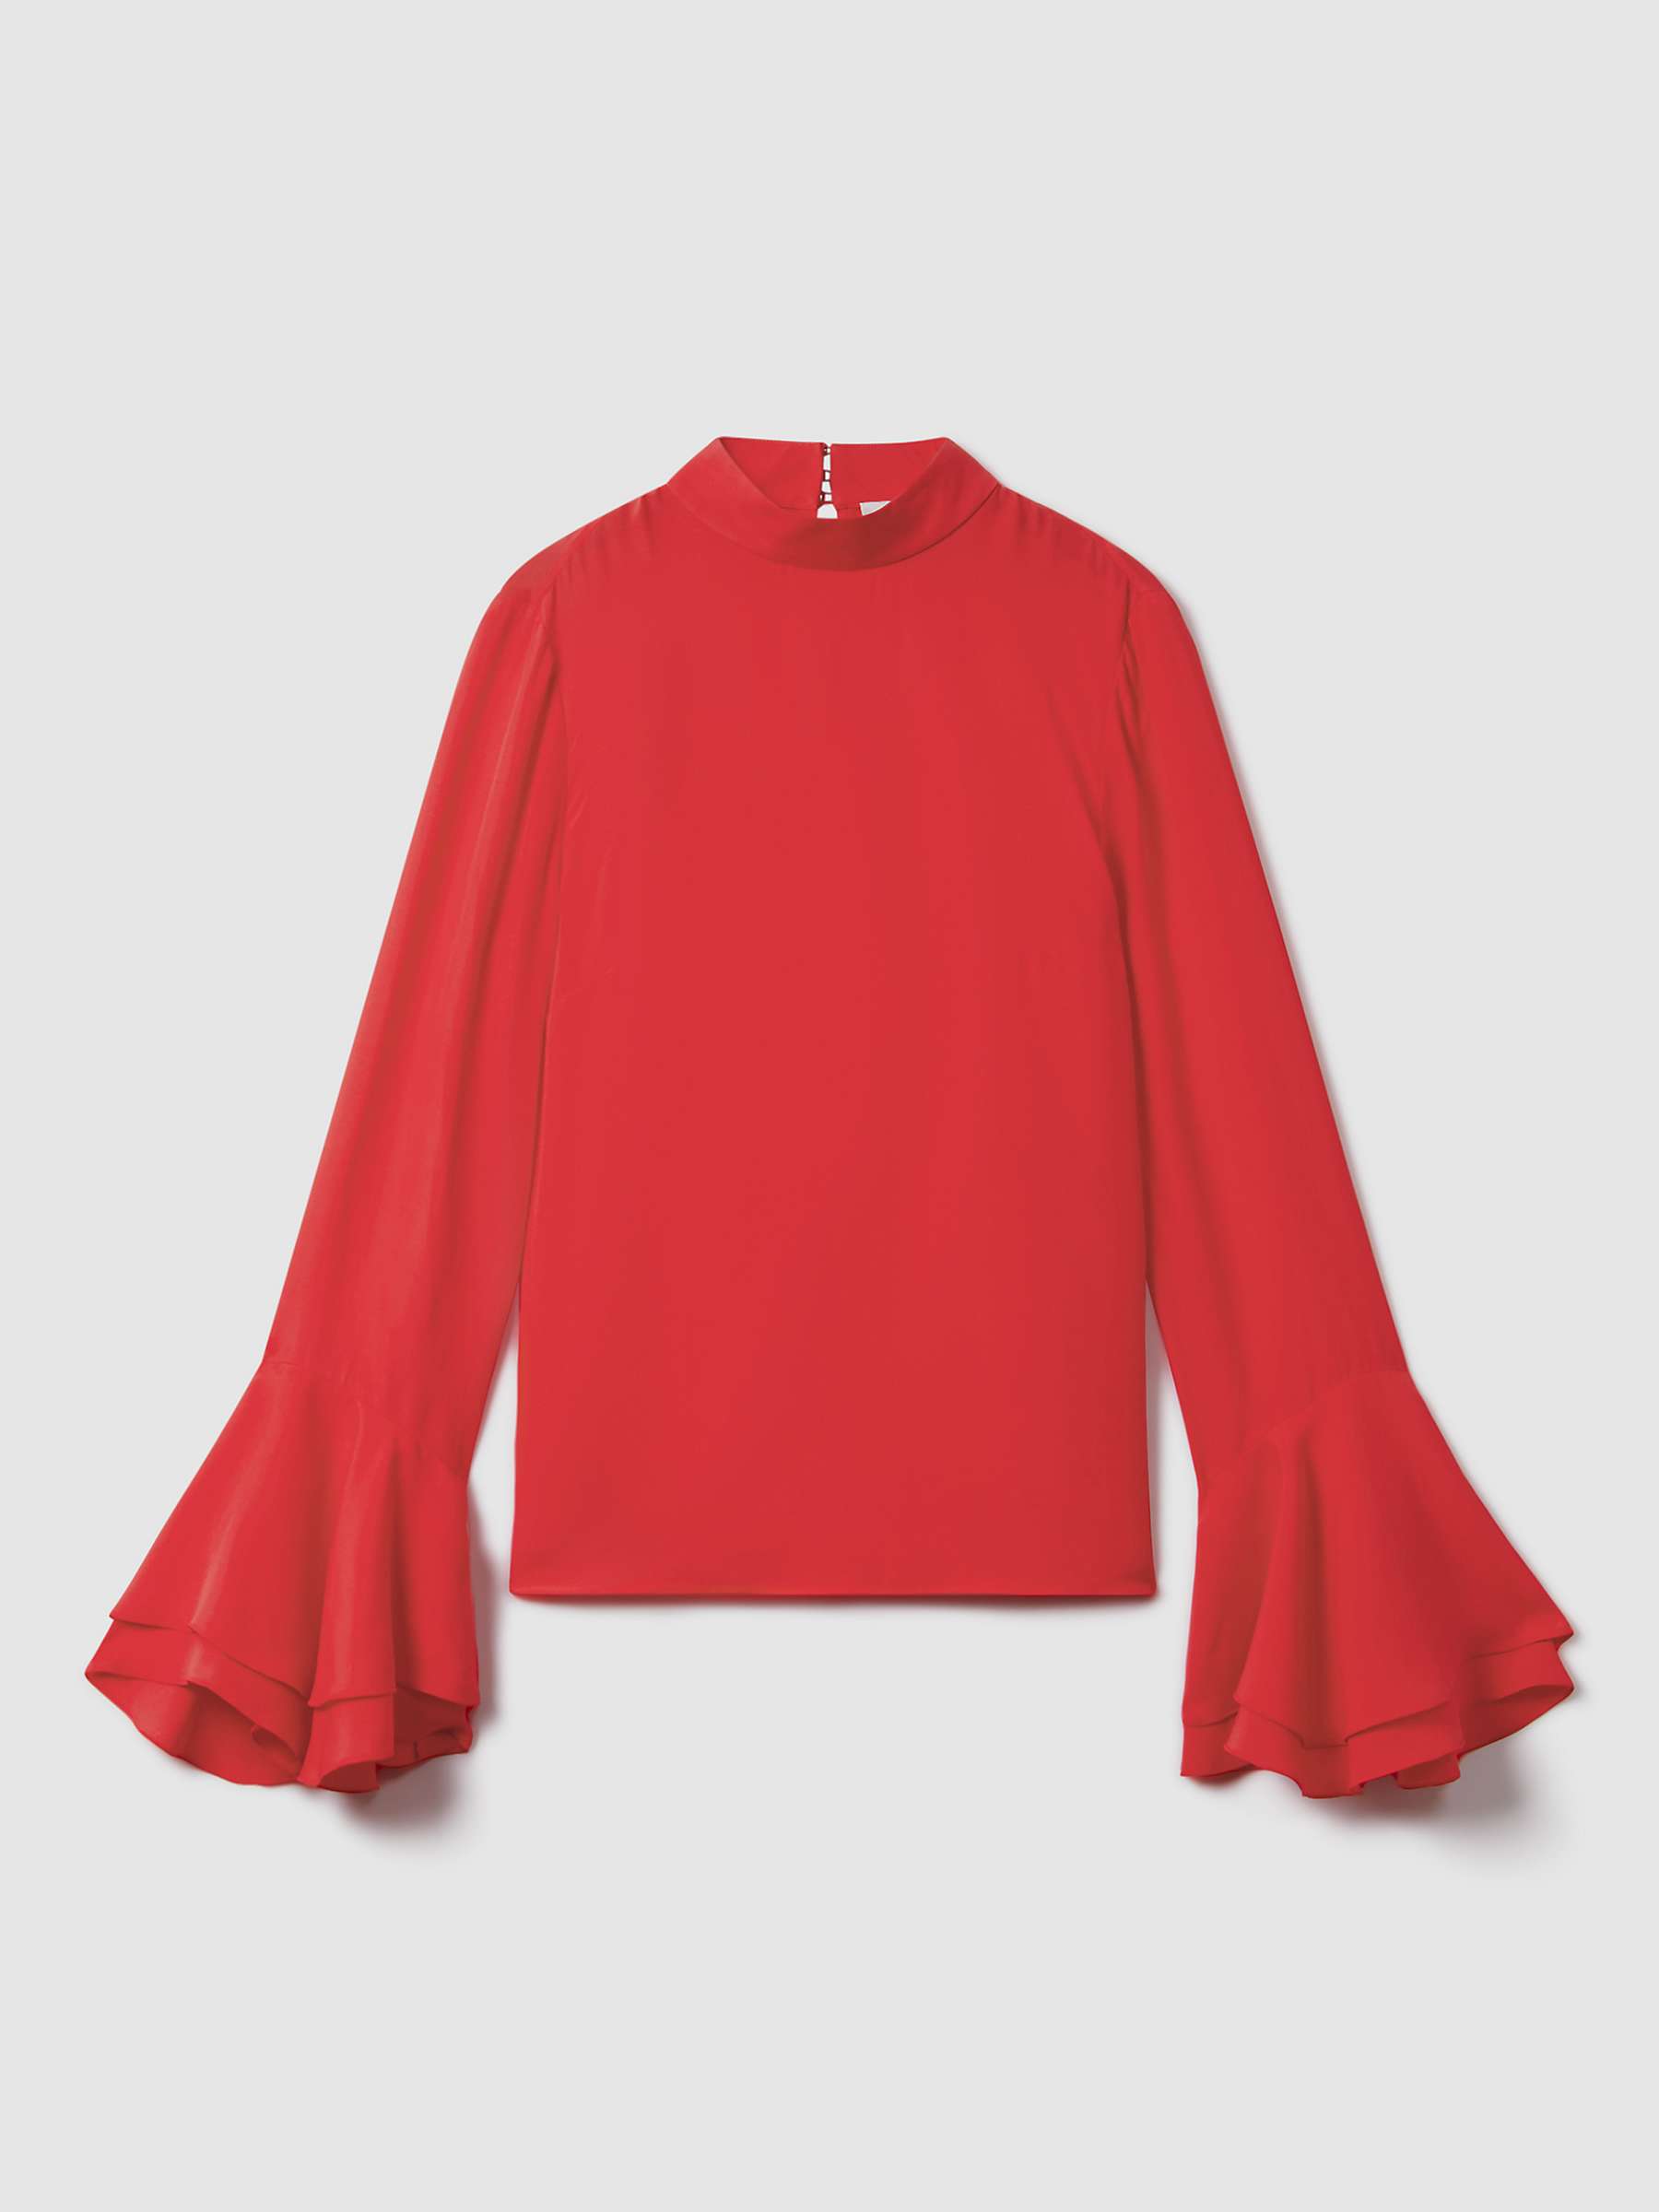 Buy FLORERE High Neck Fluted Cuff Blouse, Deep Coral Online at johnlewis.com